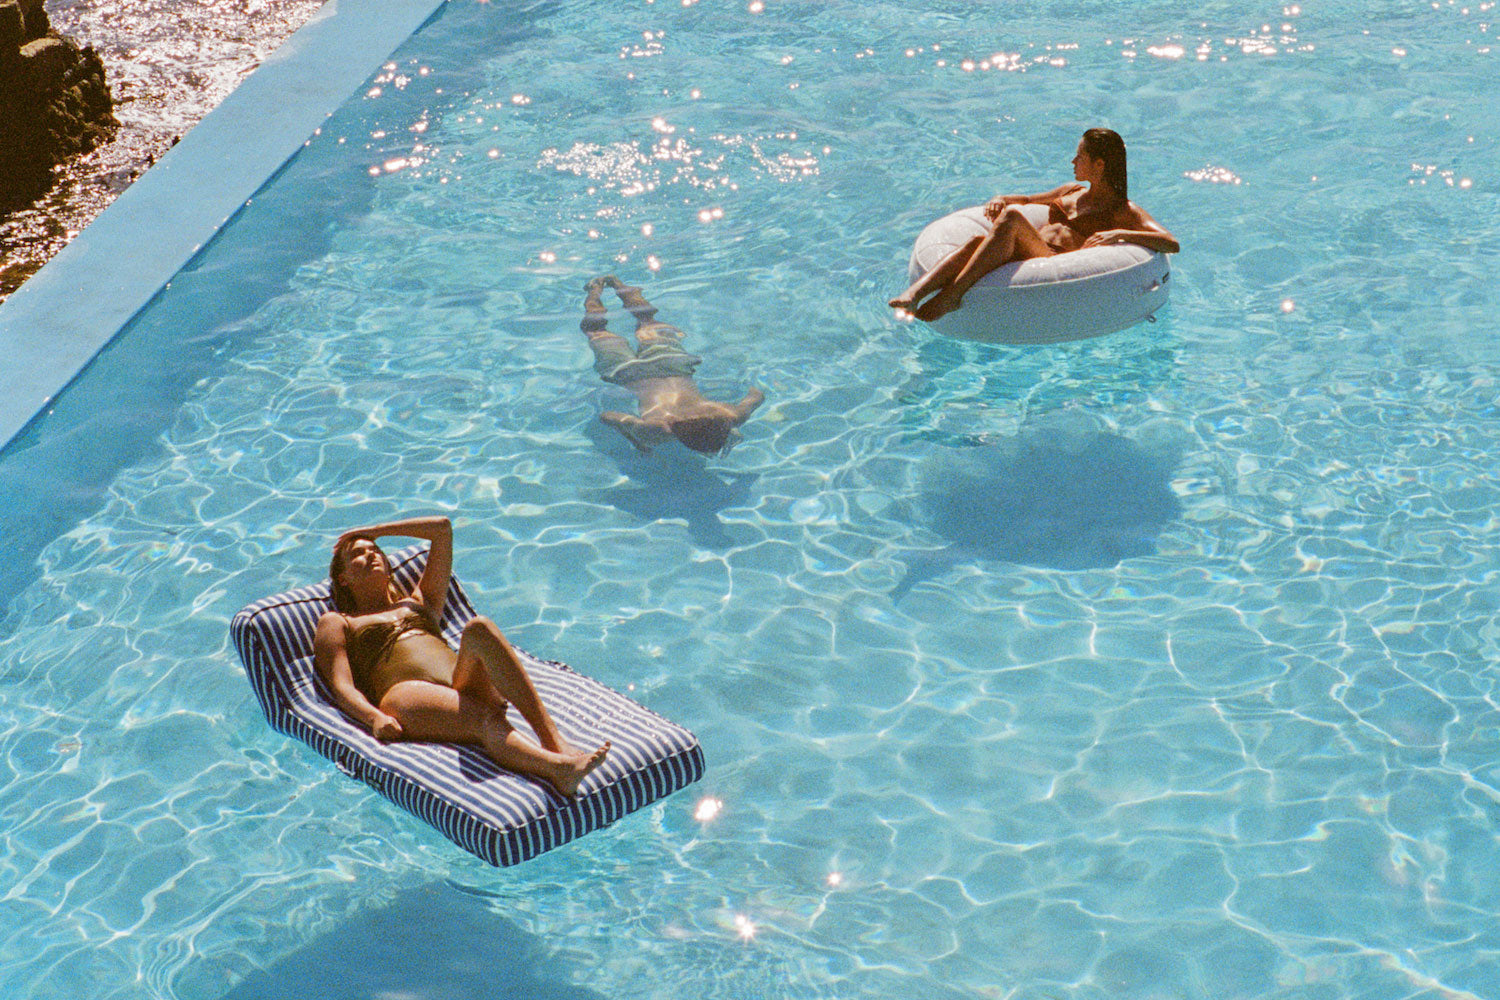 Two adults on pool floats for adults in a swimming pool with a man swimming beneath them underwater. 